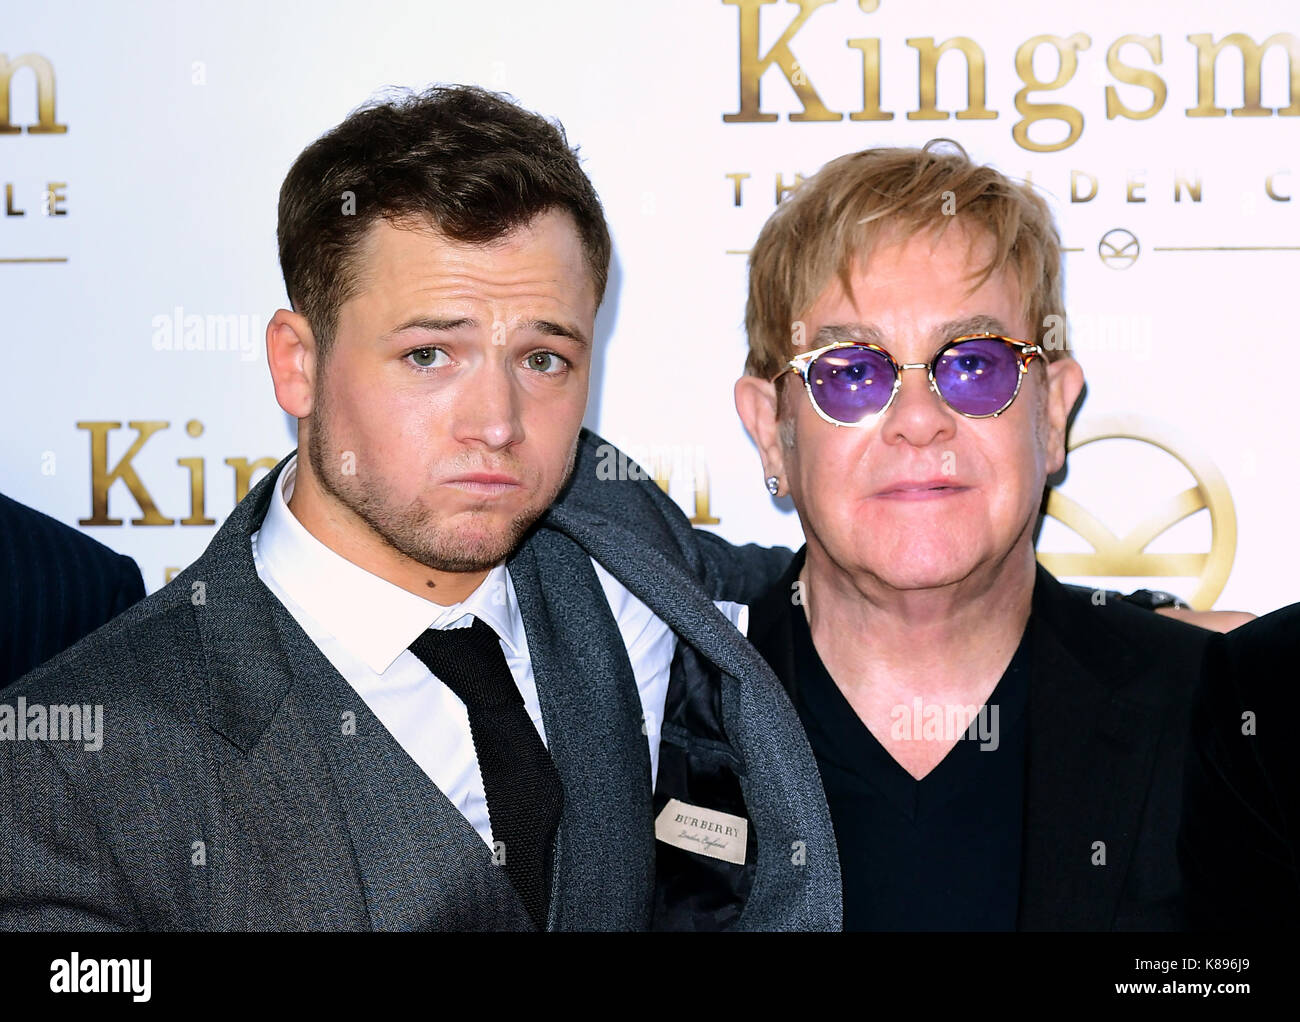 Taron Egerton and Elton John attending the World Premiere of Kingsman: The  Golden Circle, at Cineworld in Leicester Square, London. Picture Date:  Monday 18 September. Photo credit should read: Ian West/PA Wire